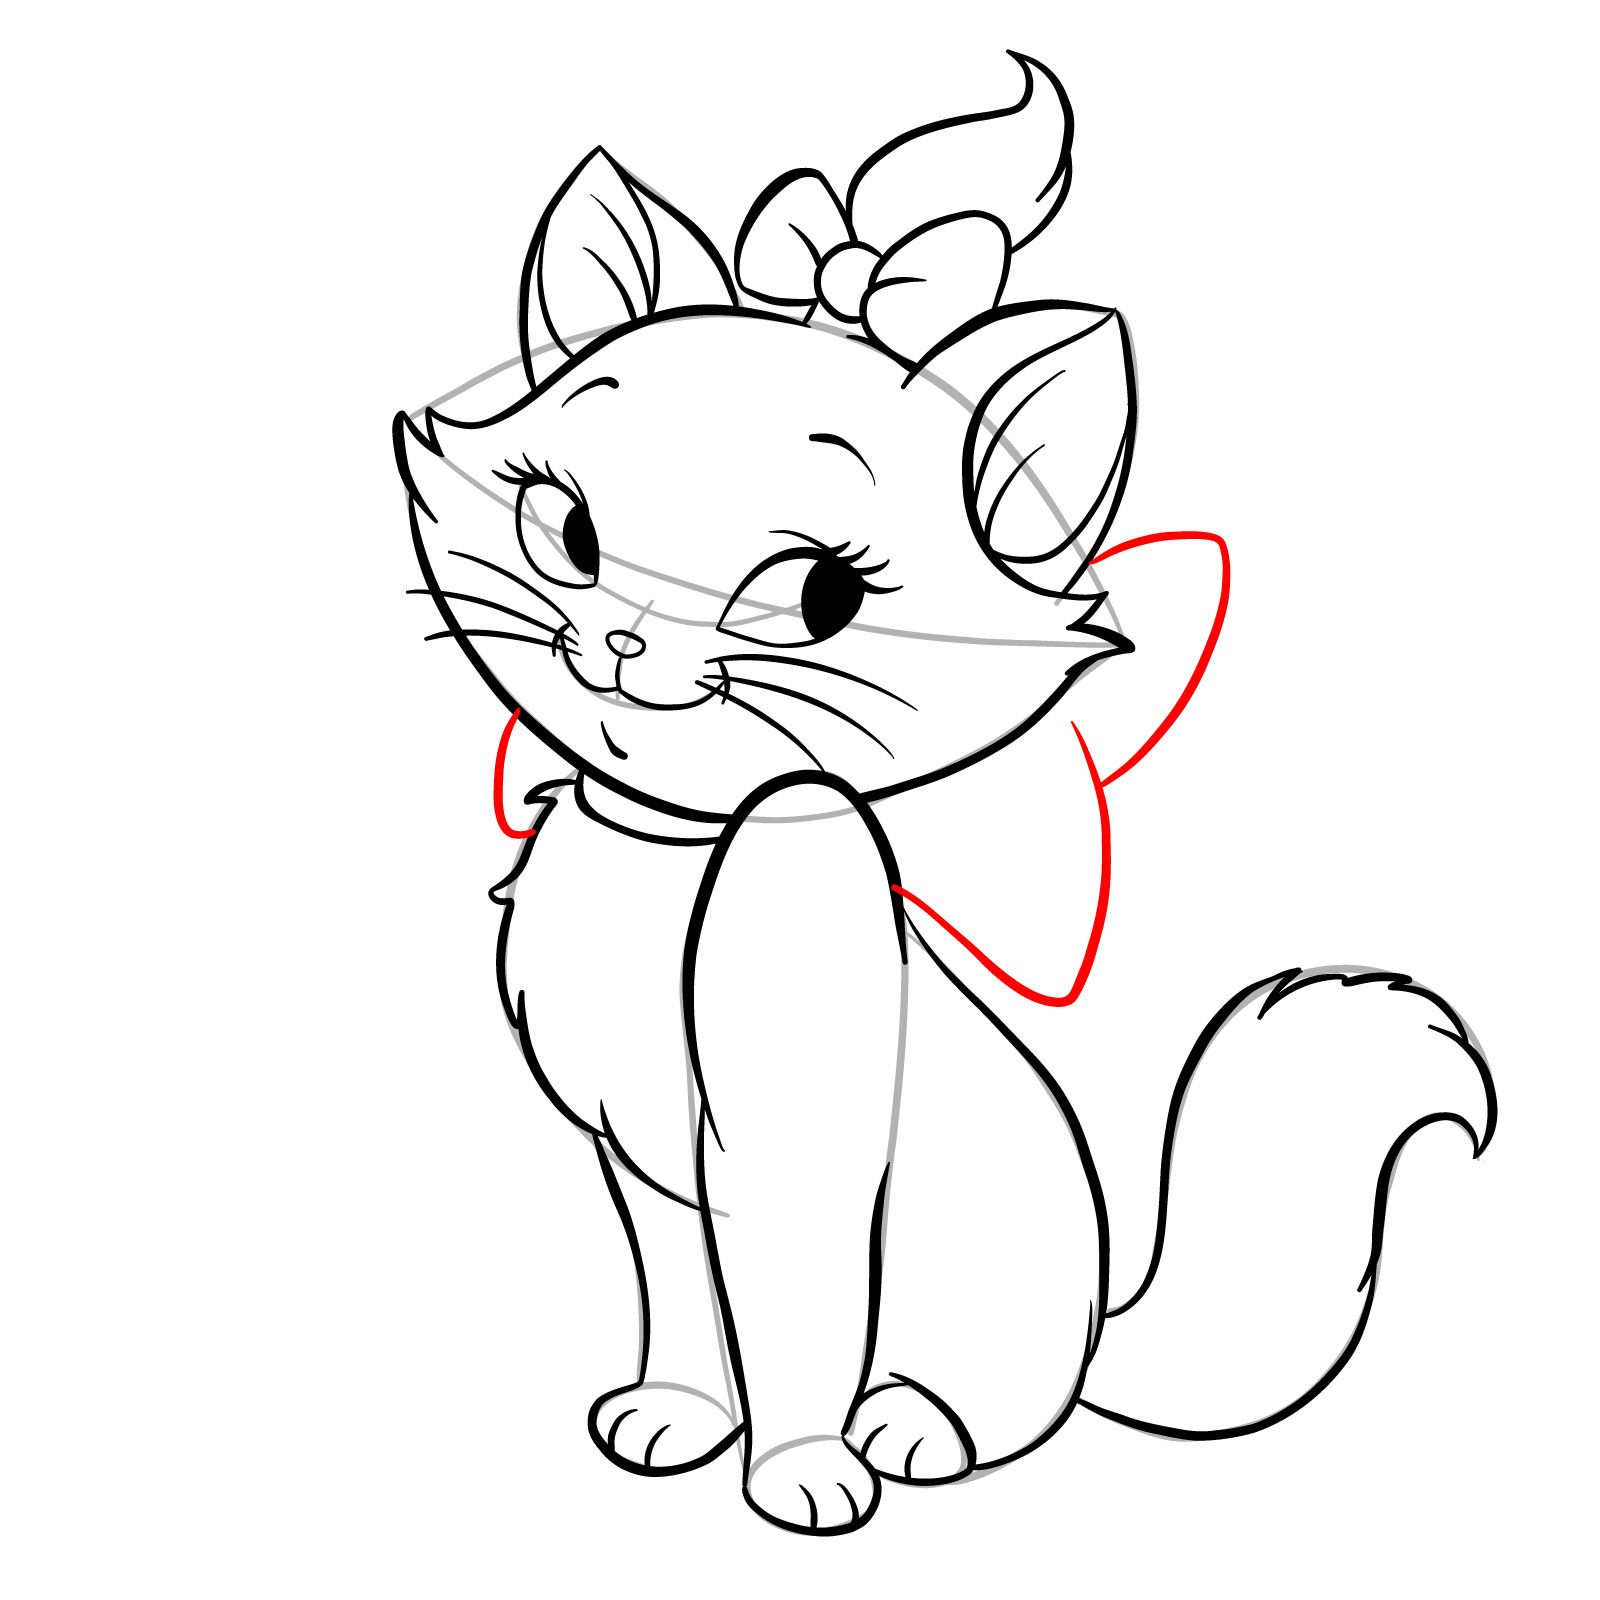 How to draw Marie from The Aristocats - step 25